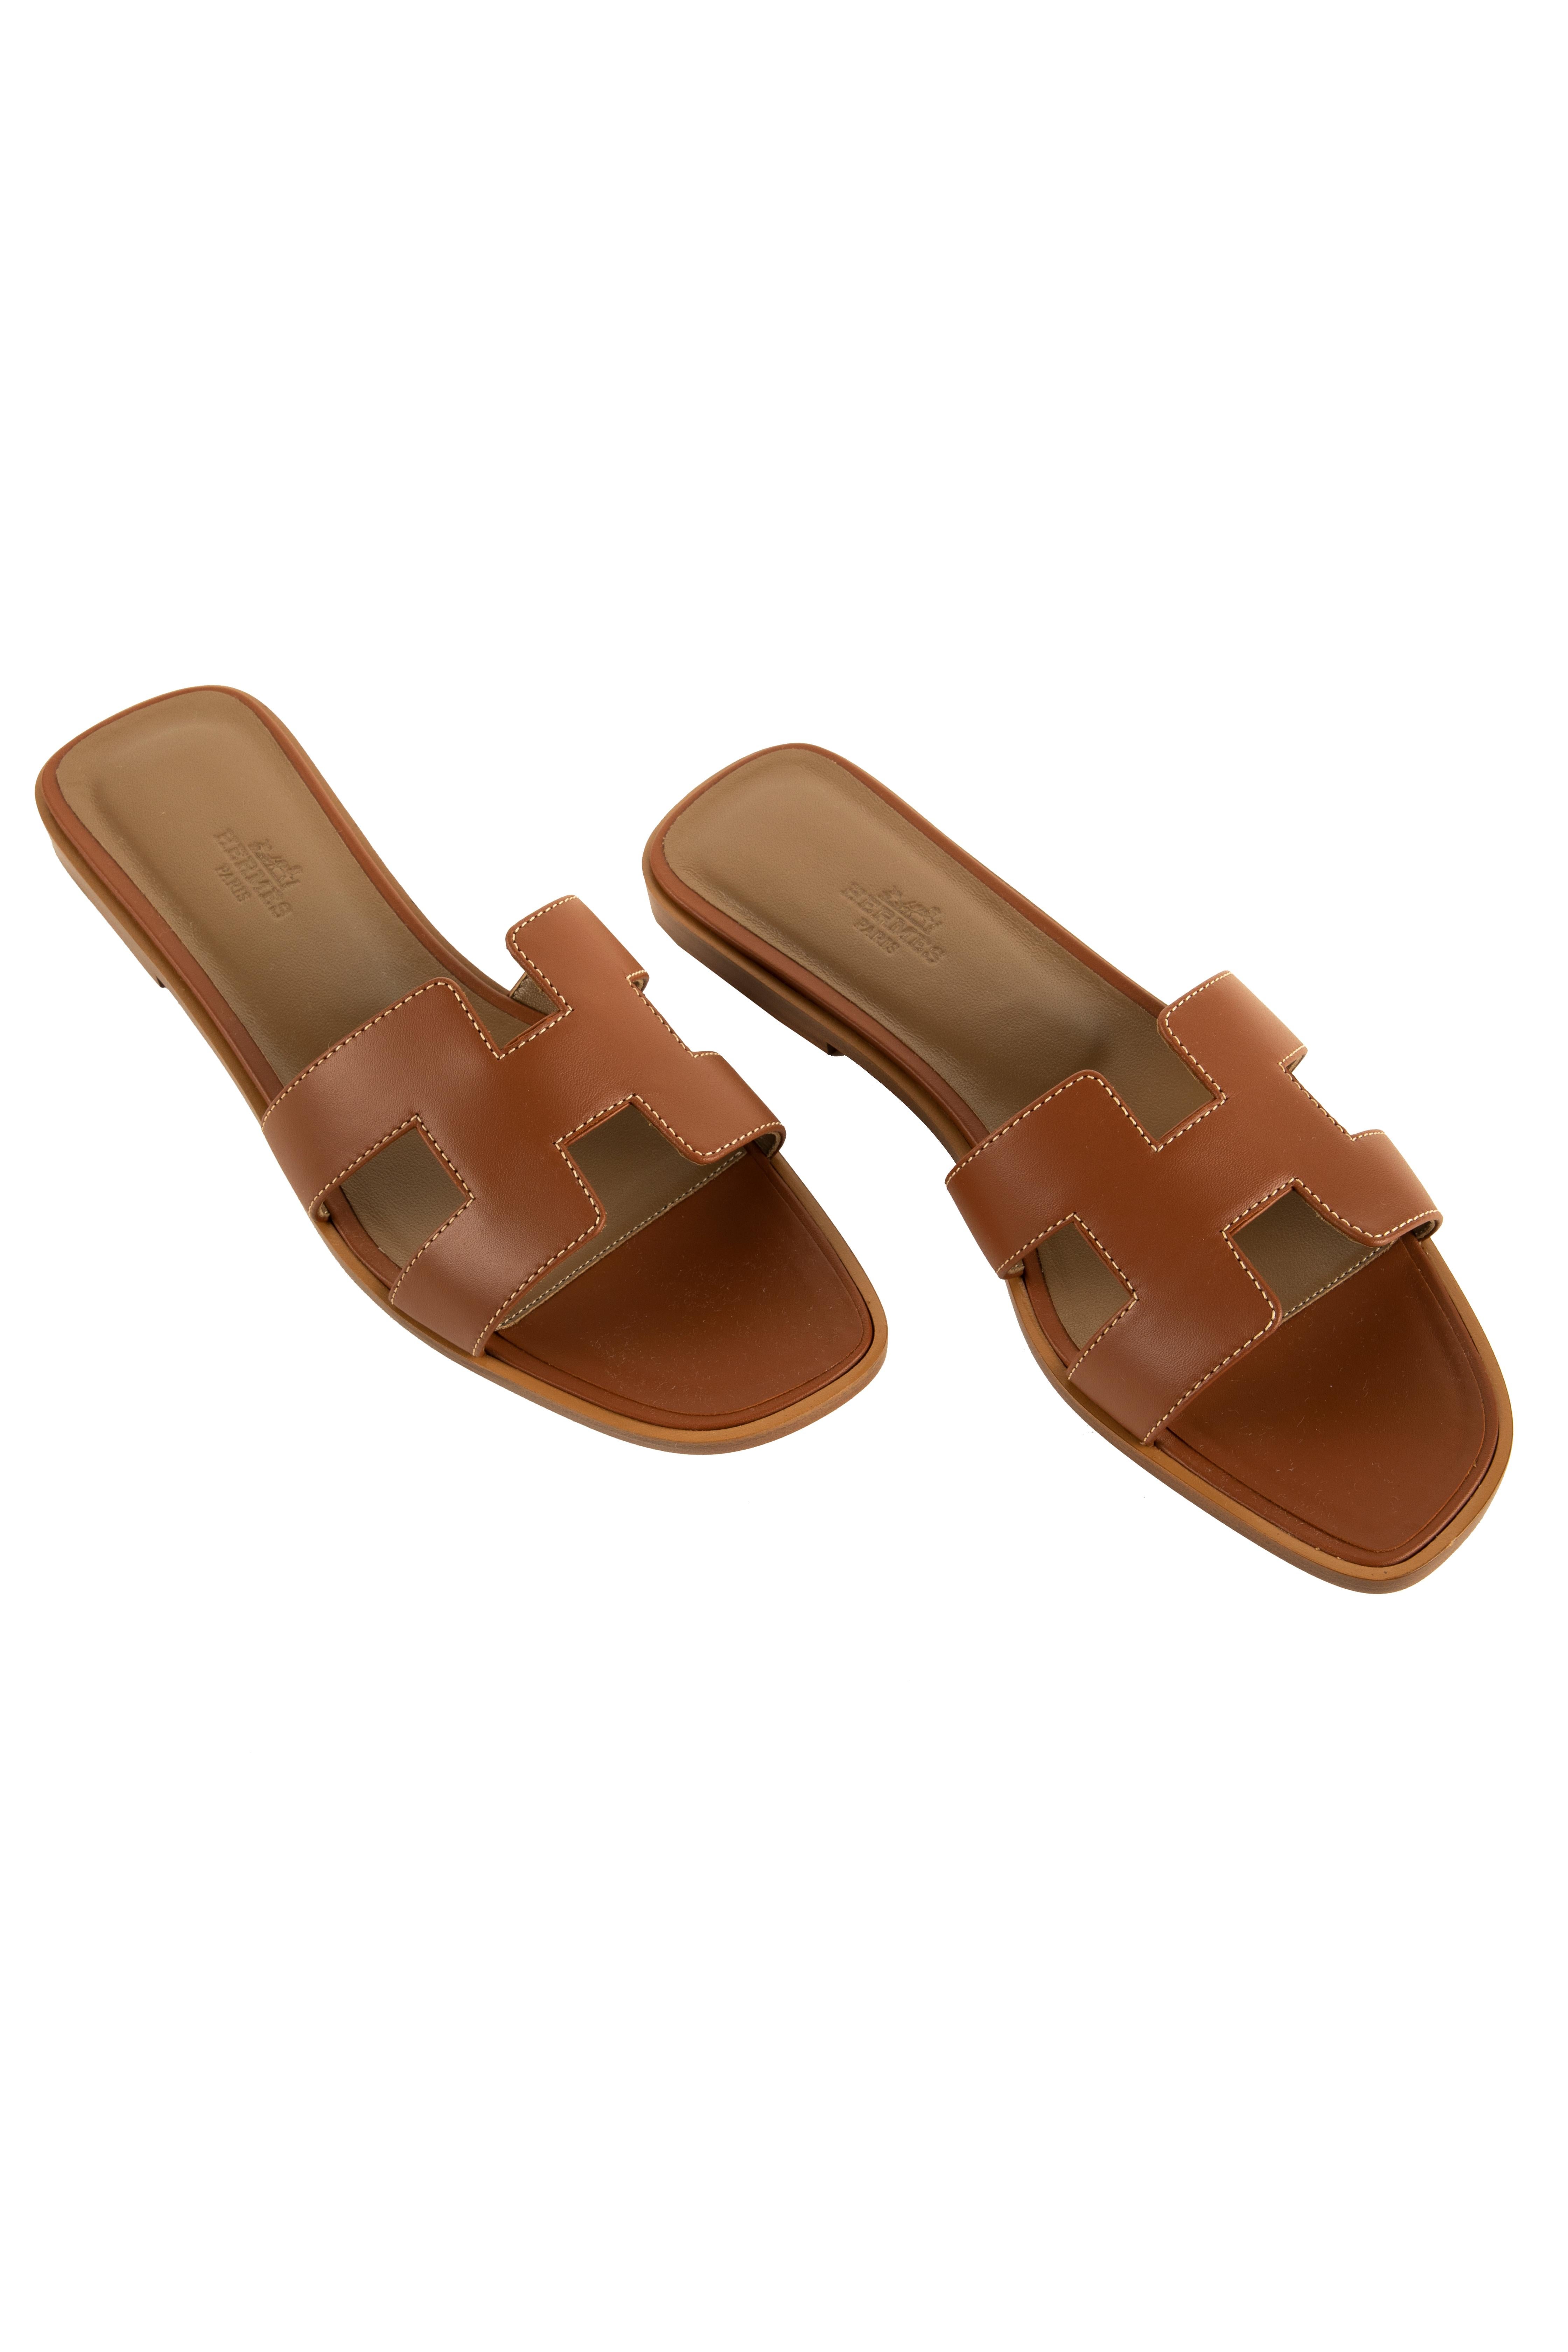 1stdibs Exclusives From Three Over Six

Brand: Hermes
Style: Oran Sandal
Size: 39FR
Color: Gold
Leather: Box Leather
Year: 2020 

Condition: Pristine, never used: The item has never been used and is in pristine condition complete with all